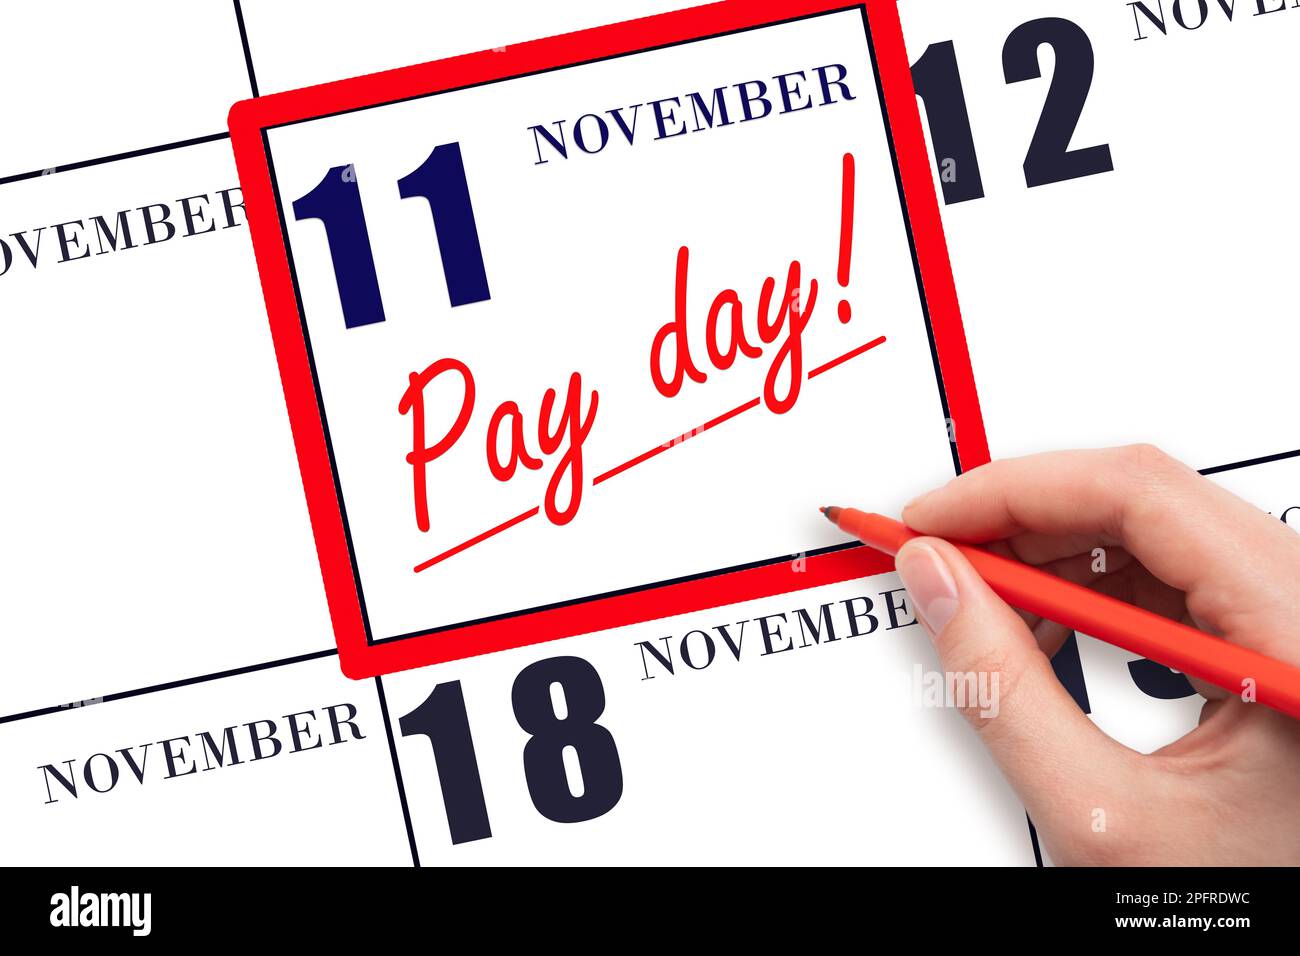 11th day of November. Hand writing text PAY DATE on calendar date November 11 and underline it. Payment due date.  Reminder concept of payment. Autumn Stock Photo